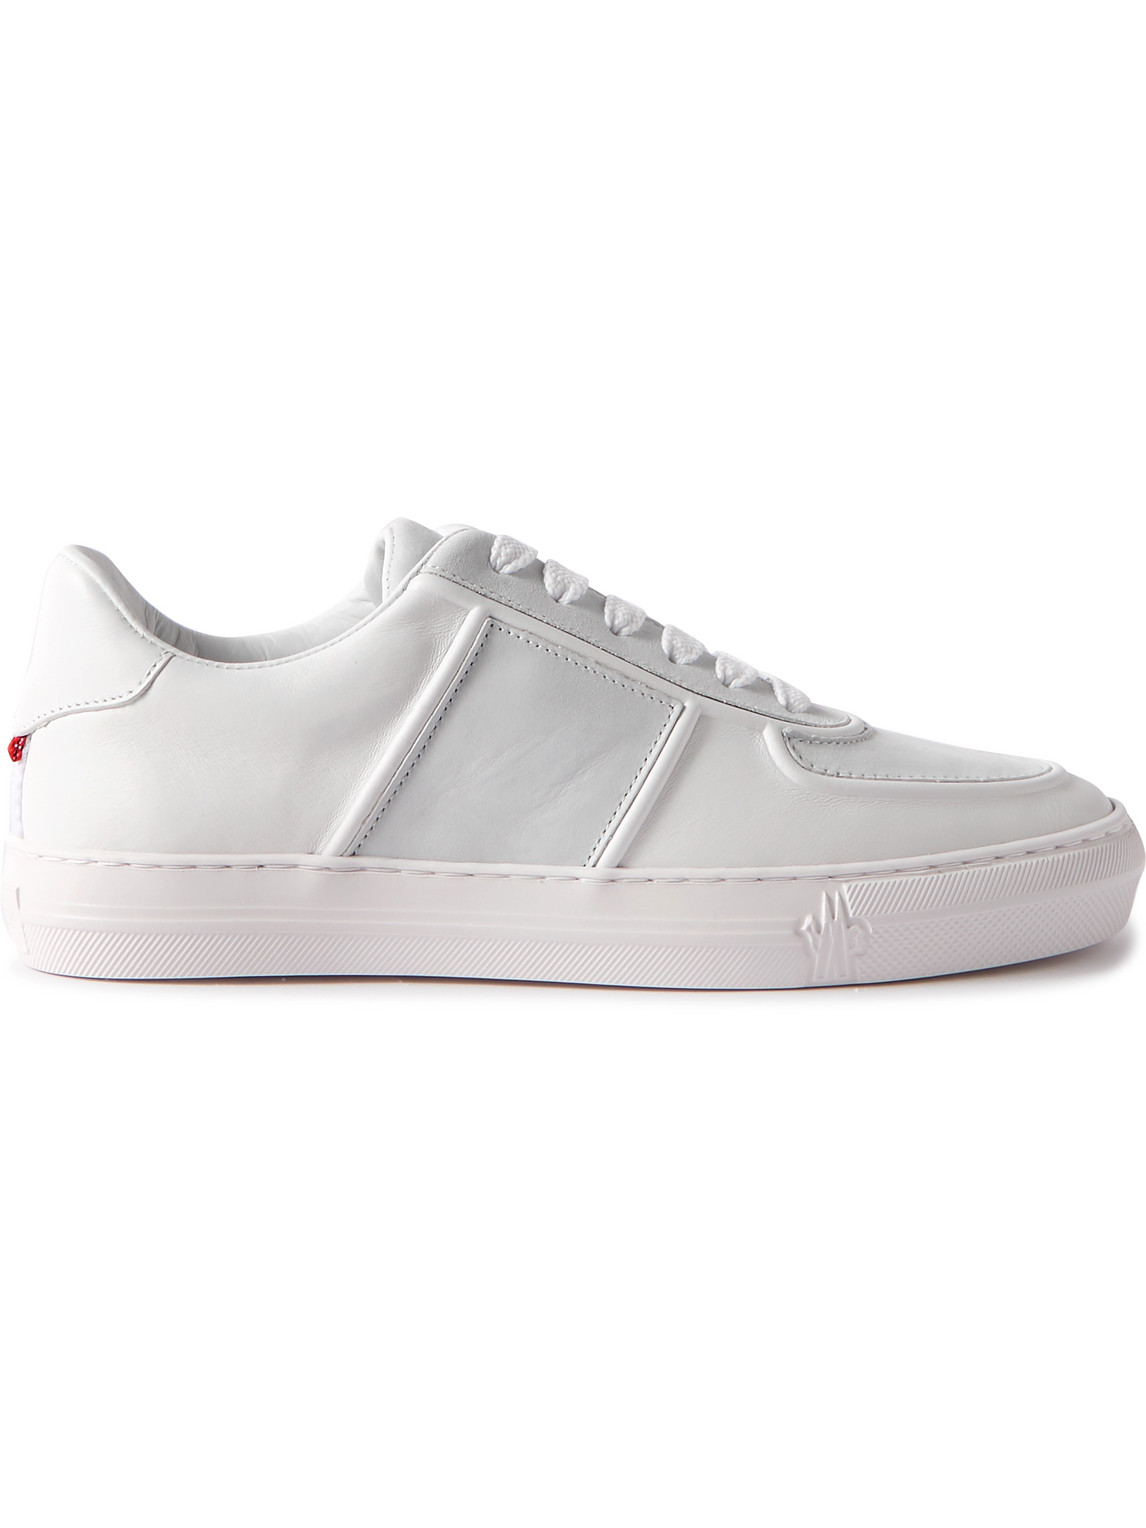 Moncler Neue York Leather Sneakers In White